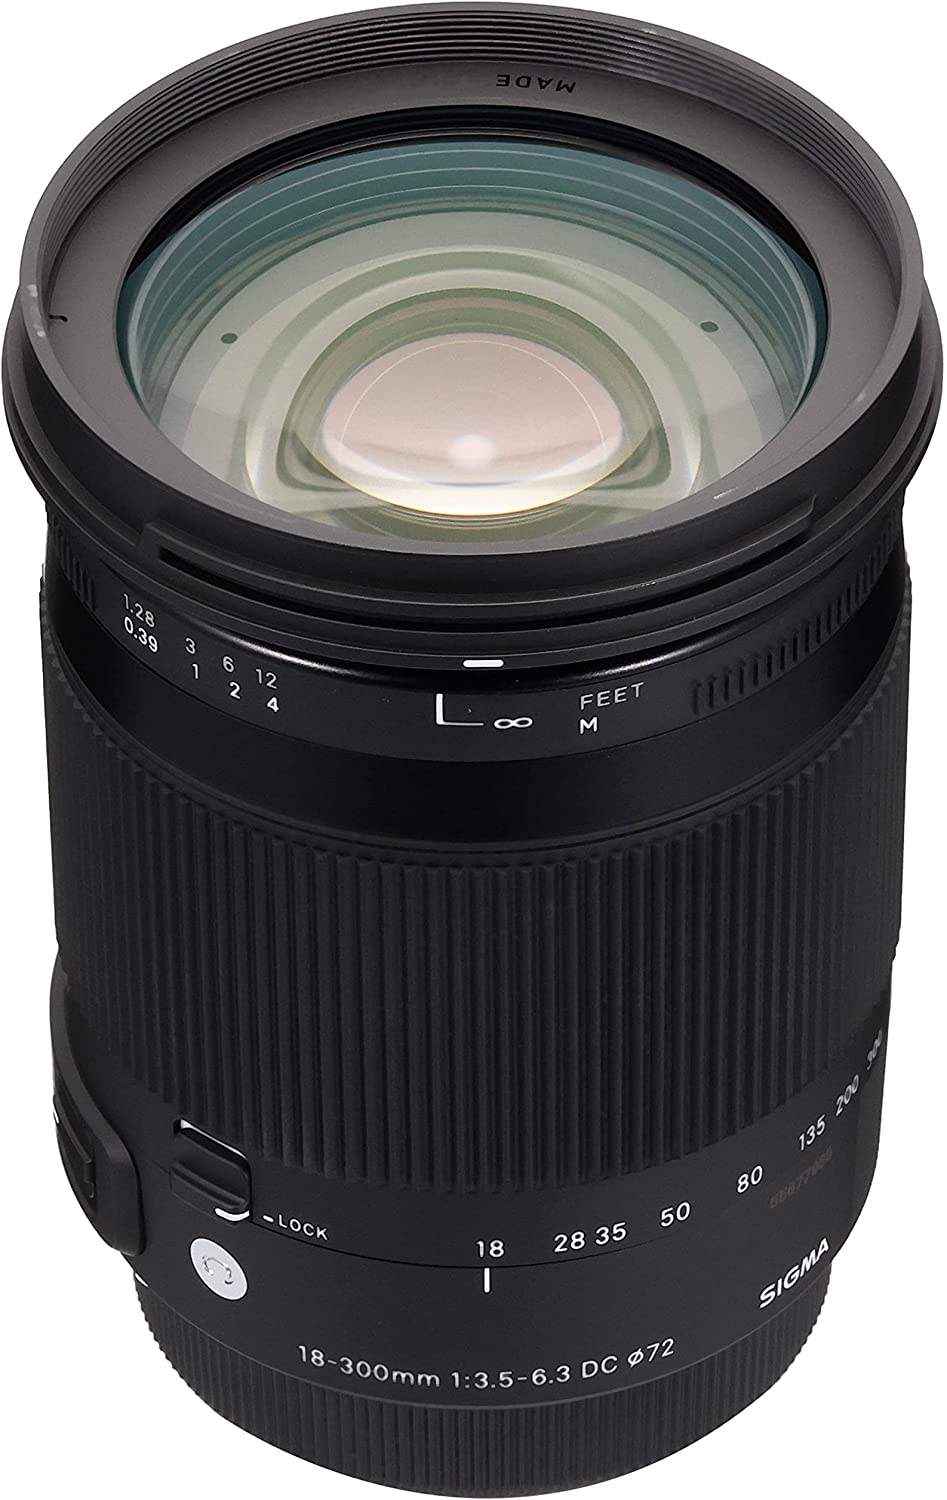 Best Canon Superzoom Lens for Travel Photography 2